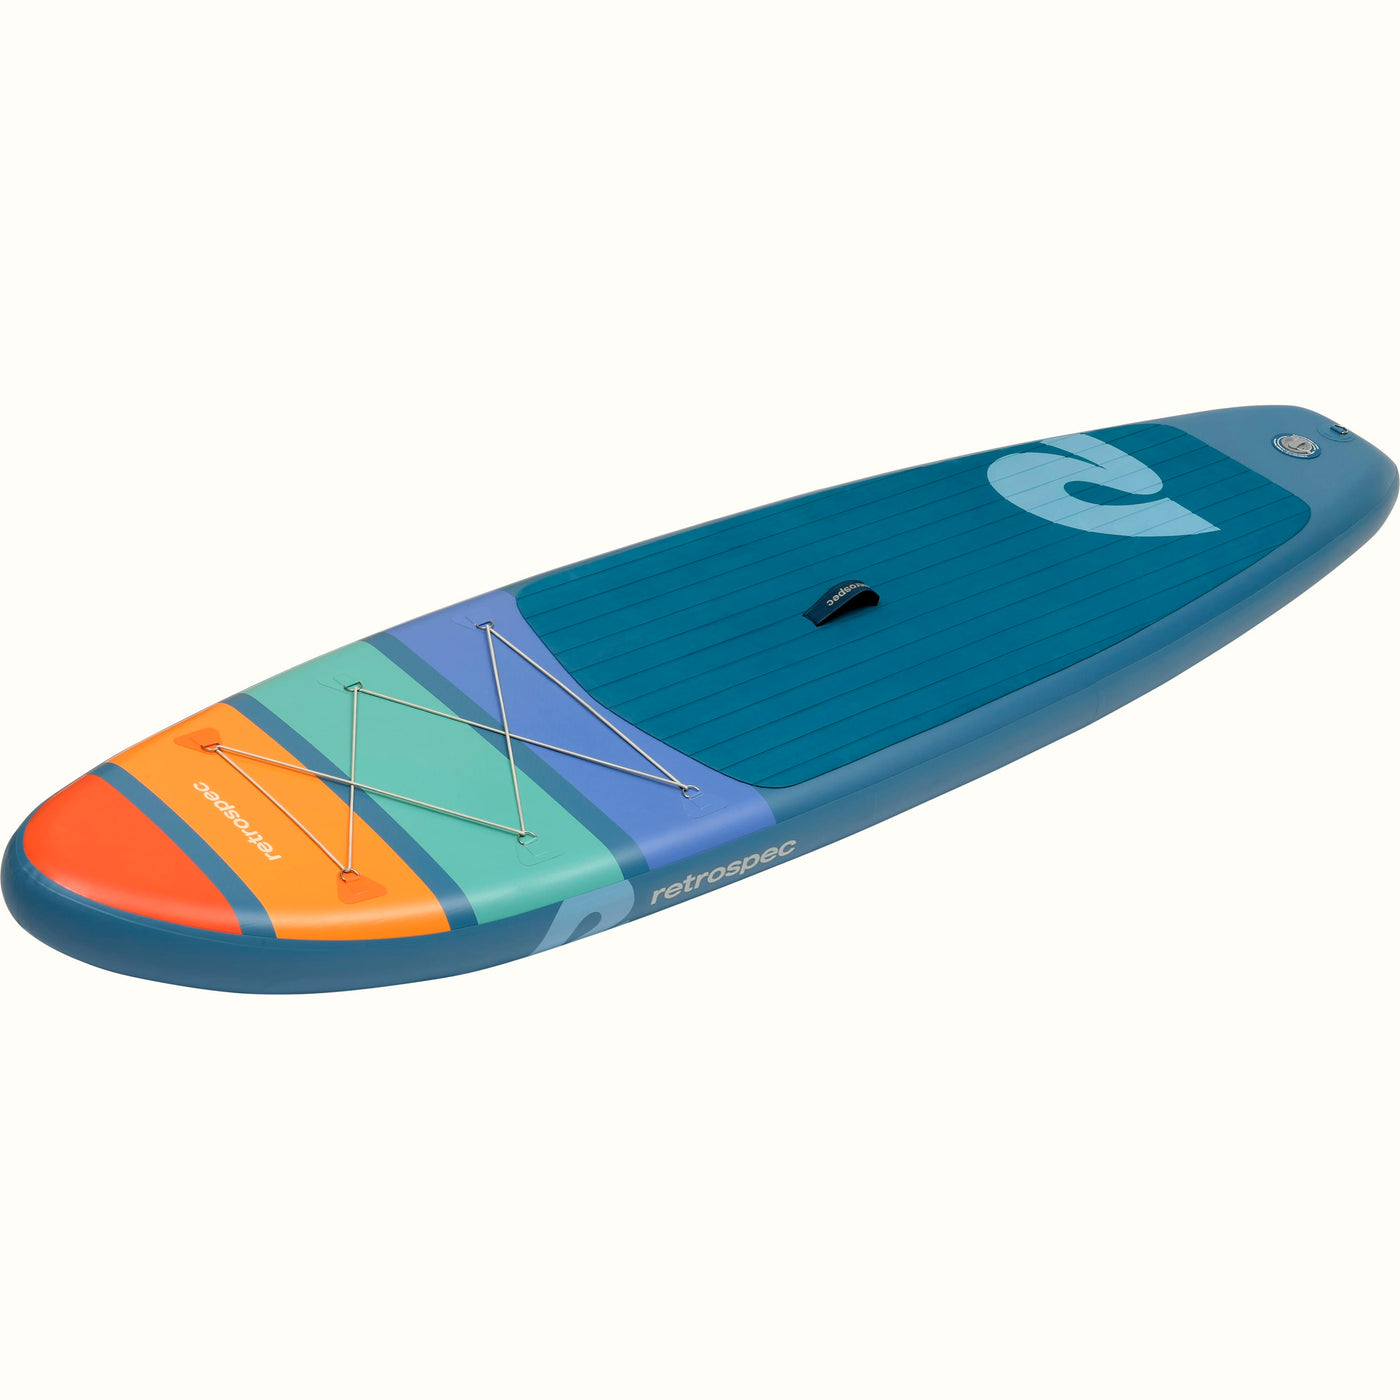 Weekender Inflatable Stand Up Paddle Board 10’6”